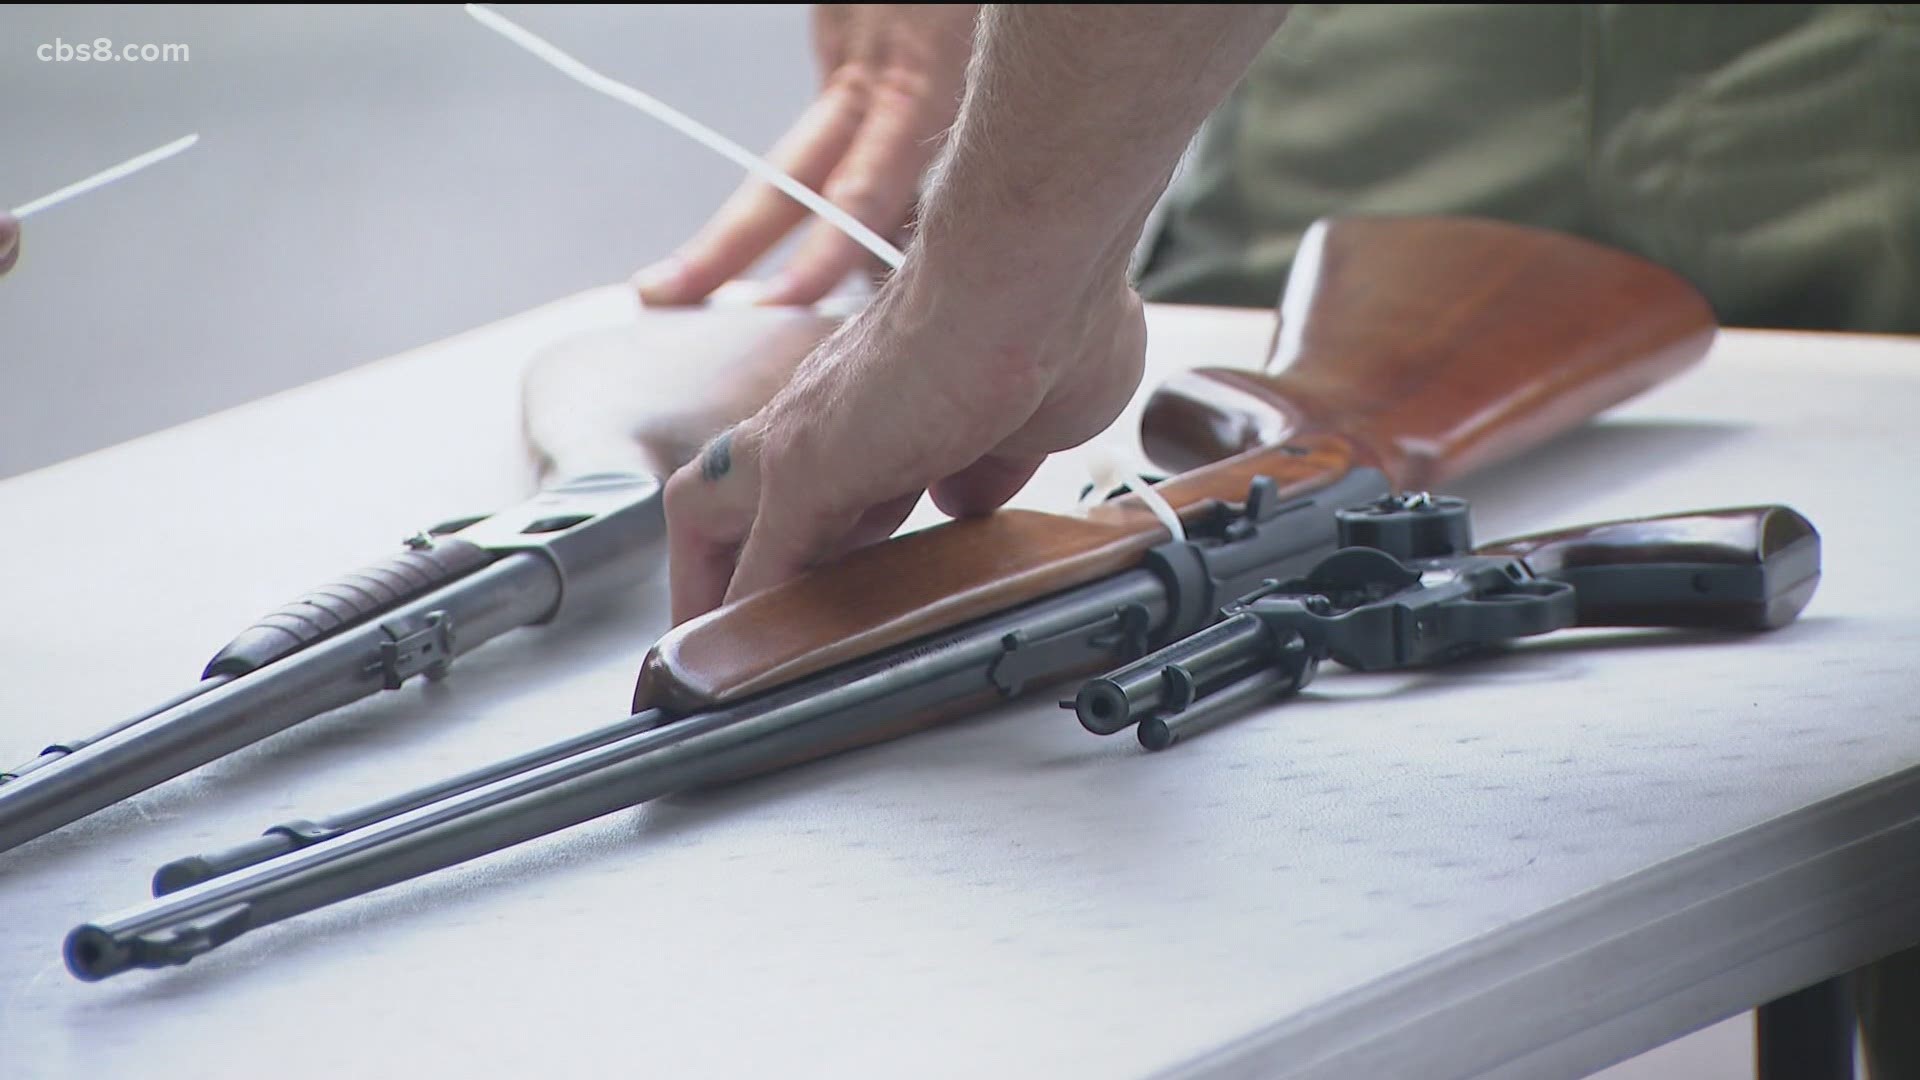 Participants in the buyback program decided to turn in their guns for a variety of reasons, and the sheriff’s department said they take them with no questions asked.